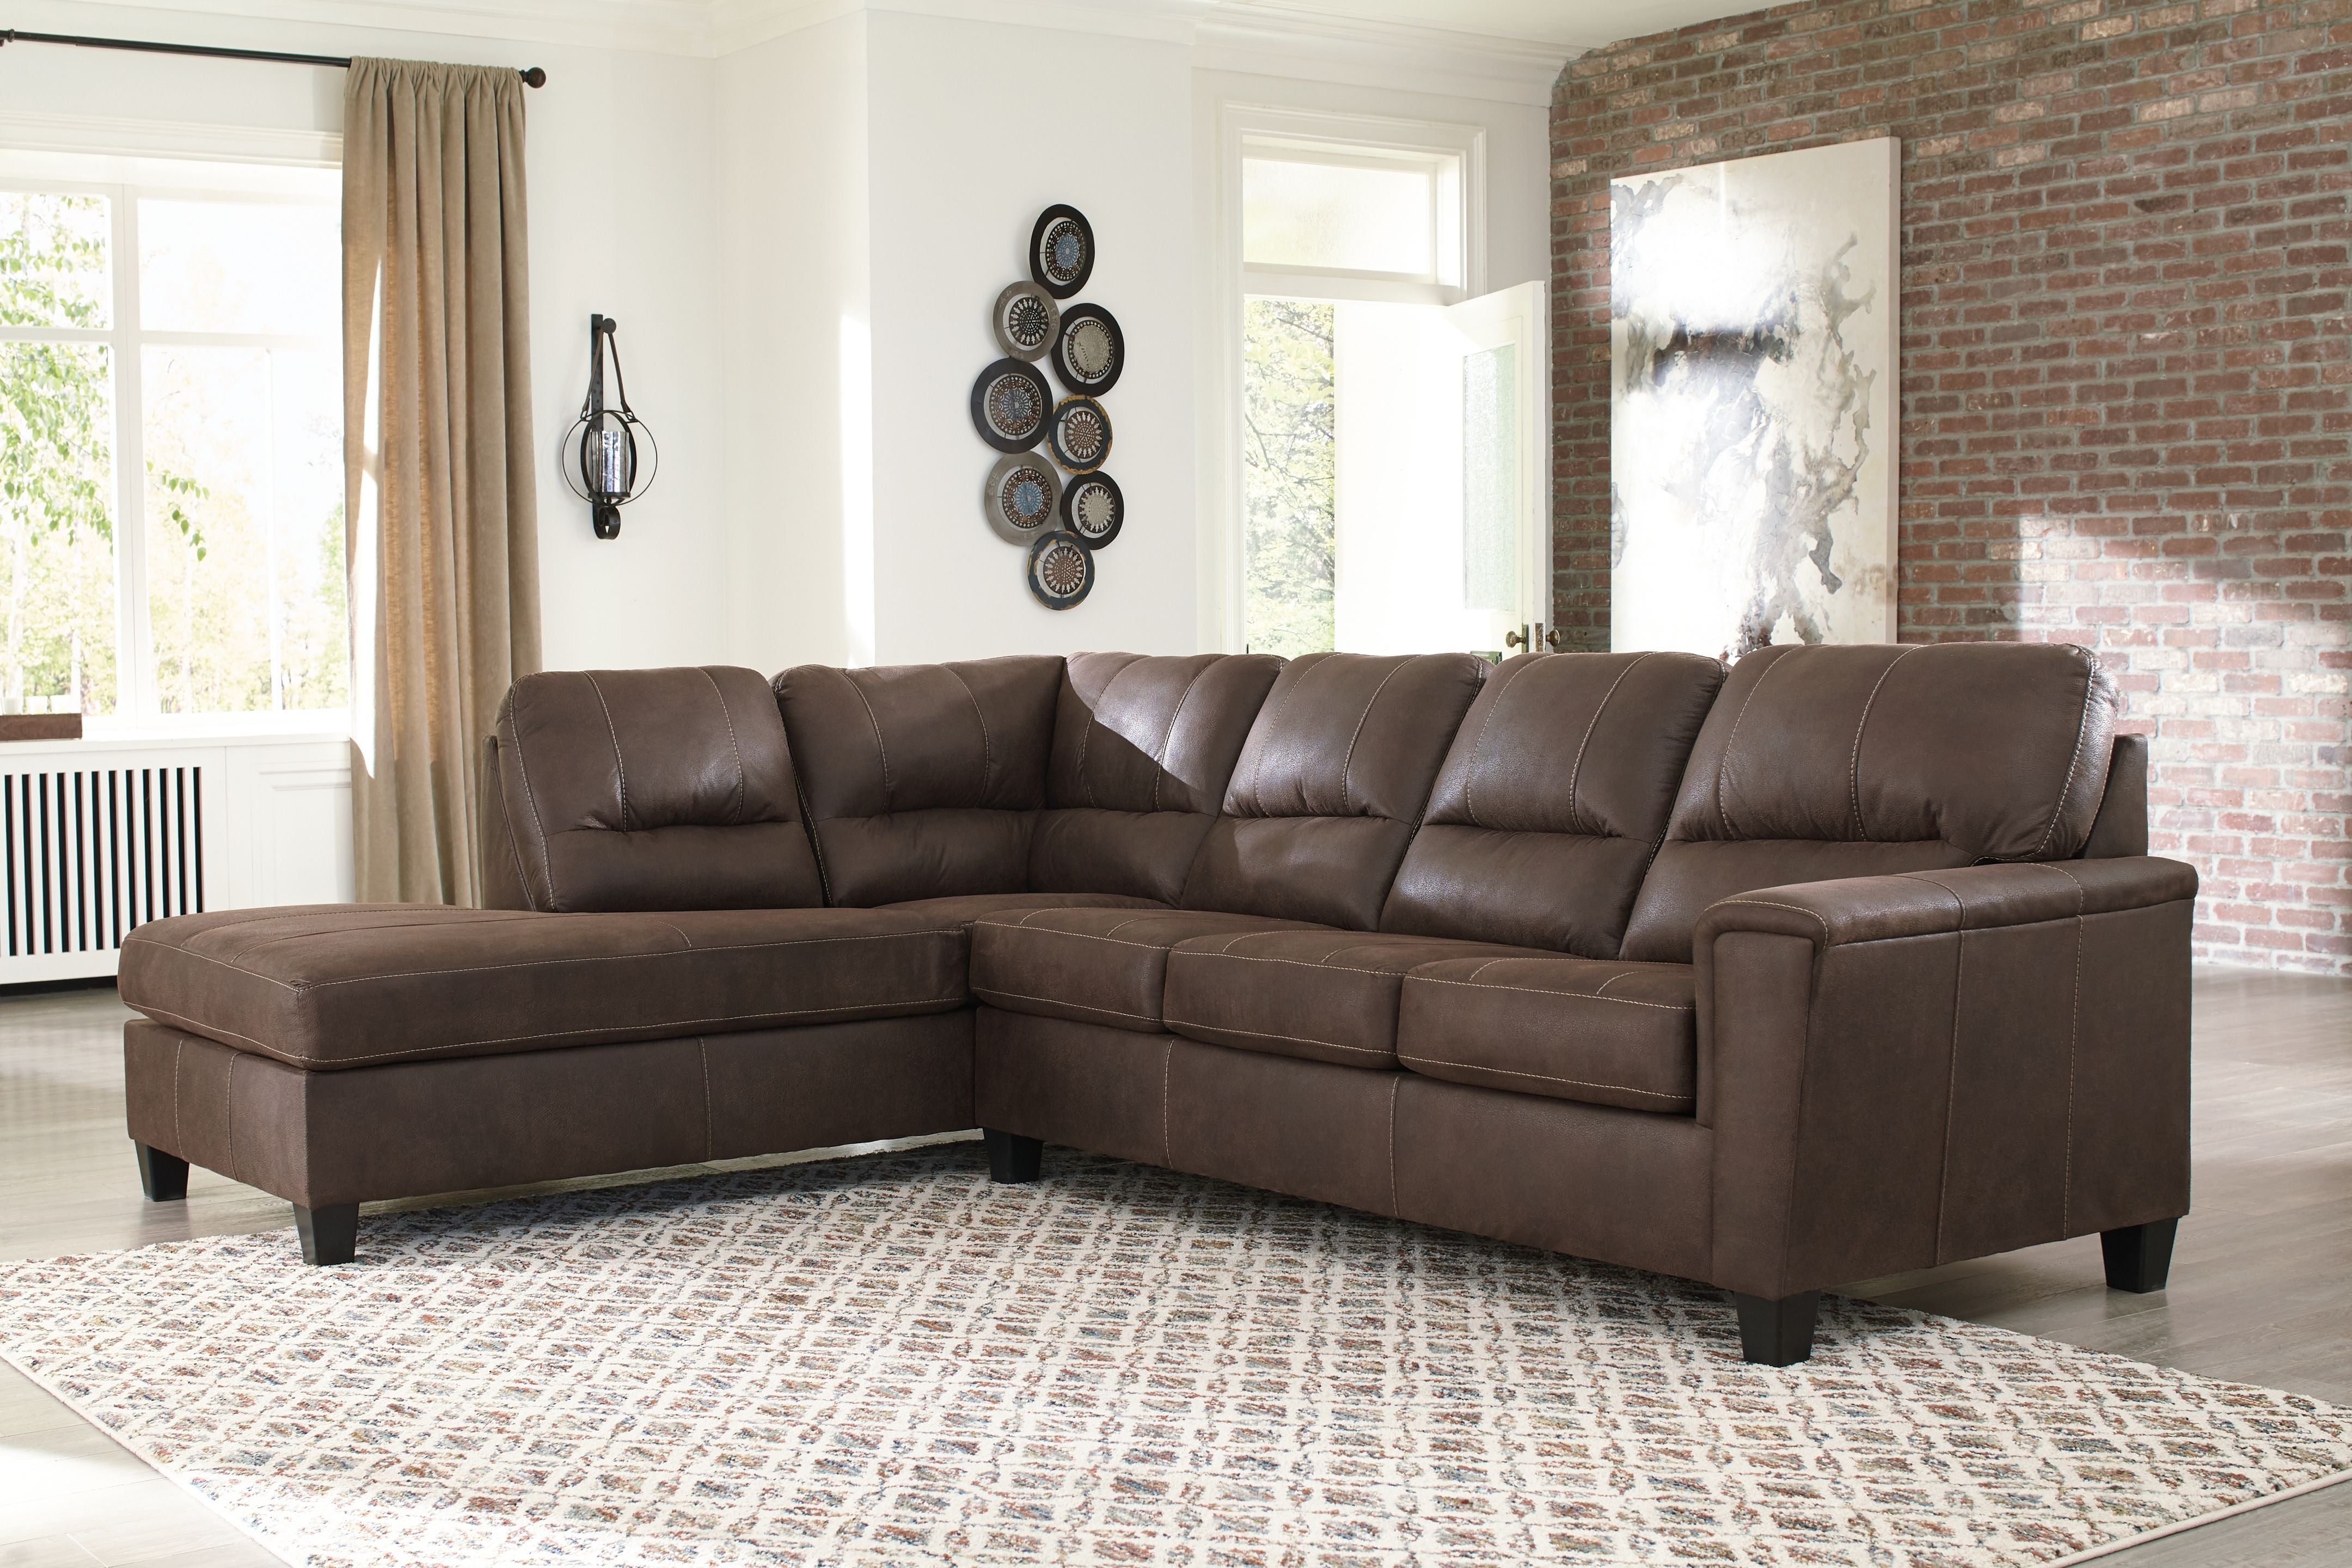 Navi Faux Leather Sleeper Sectional w/ Chaise